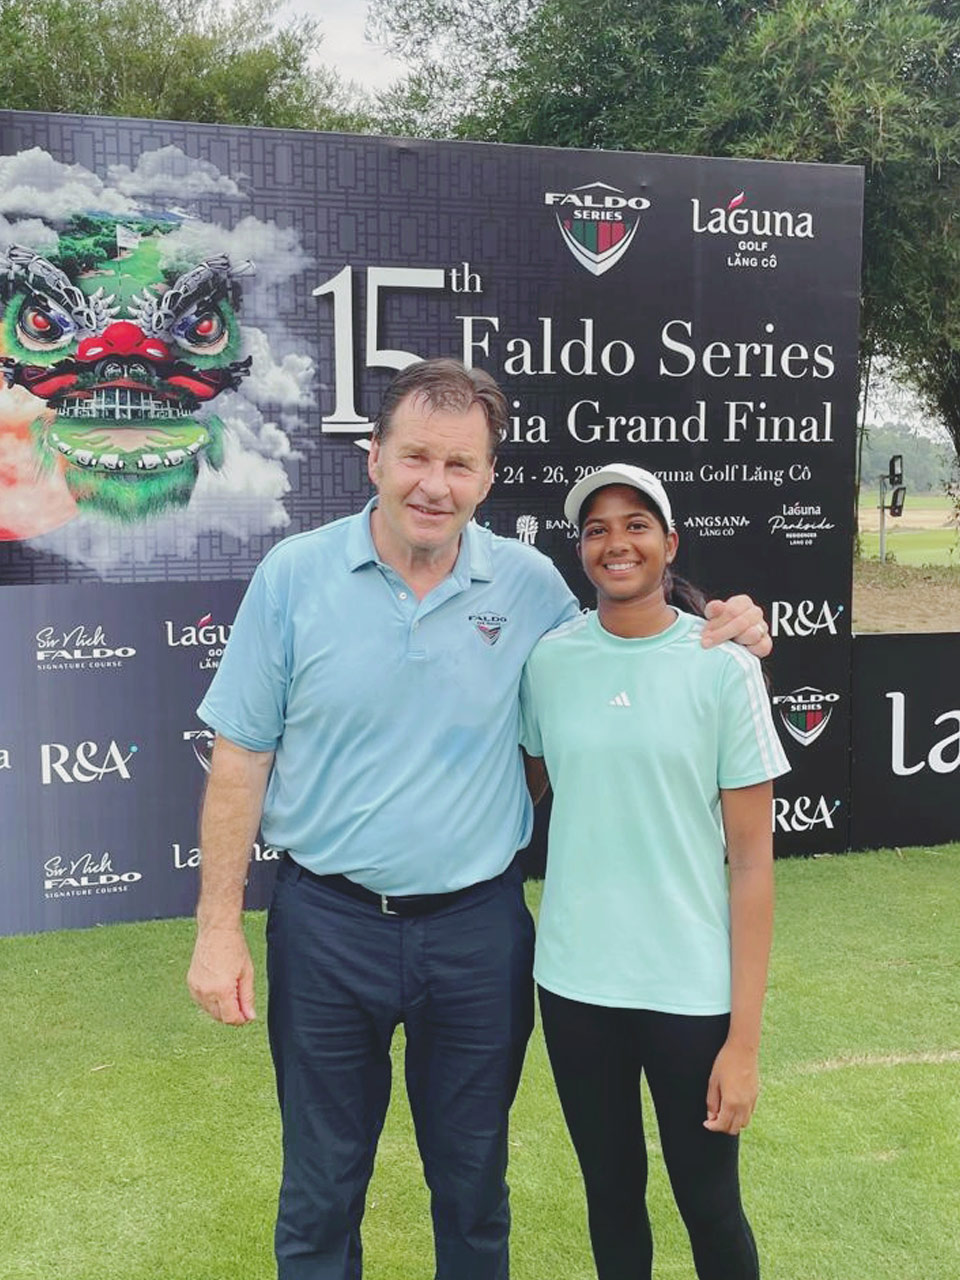 Kaya Daluwatte finished T4th in the grand finale of the Faldo Junior Series, held at Laguna Golf Club in Vietnam